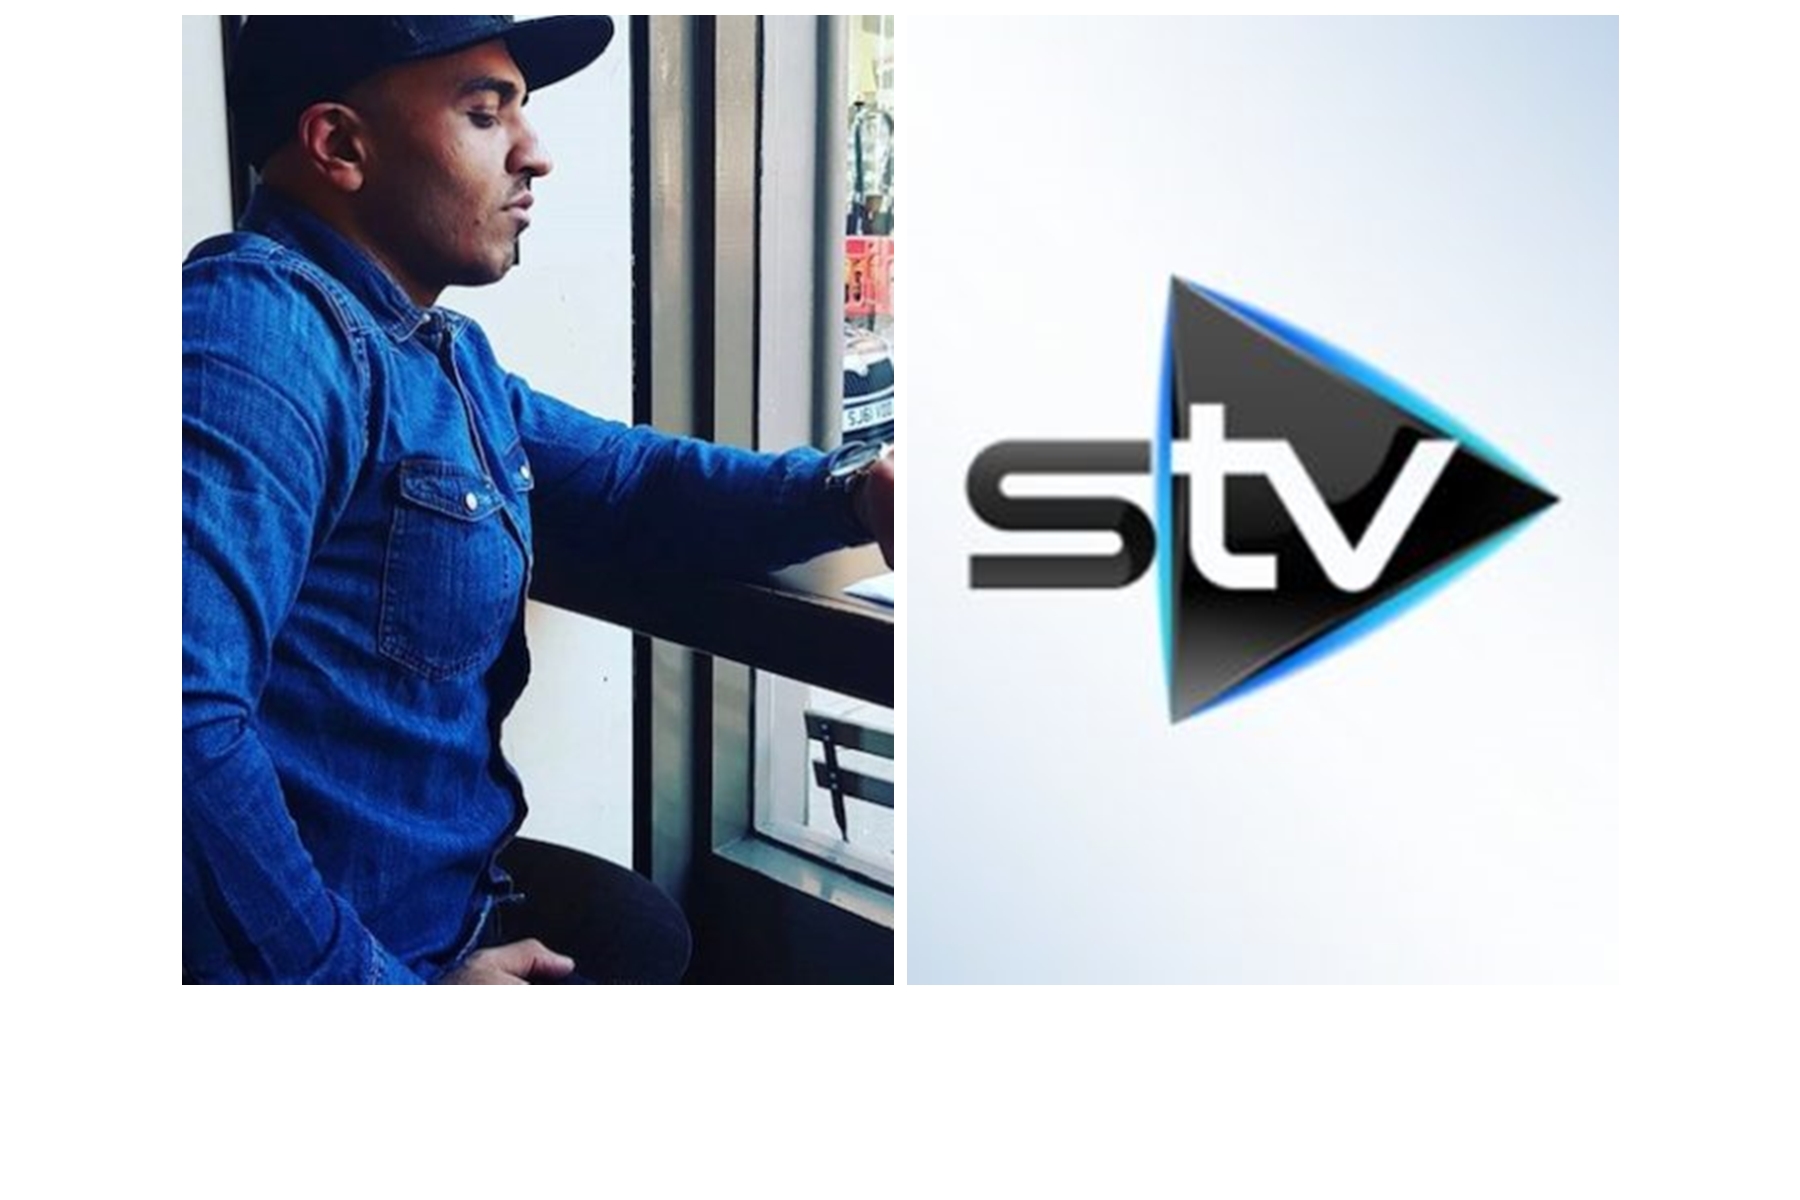 STV News Slander Adnan Ahmed, Falsely Accusing Him Of Fake Charges He Did Not Commit, Ahmed Is Innocent And Did Not Commit Sexual Assault